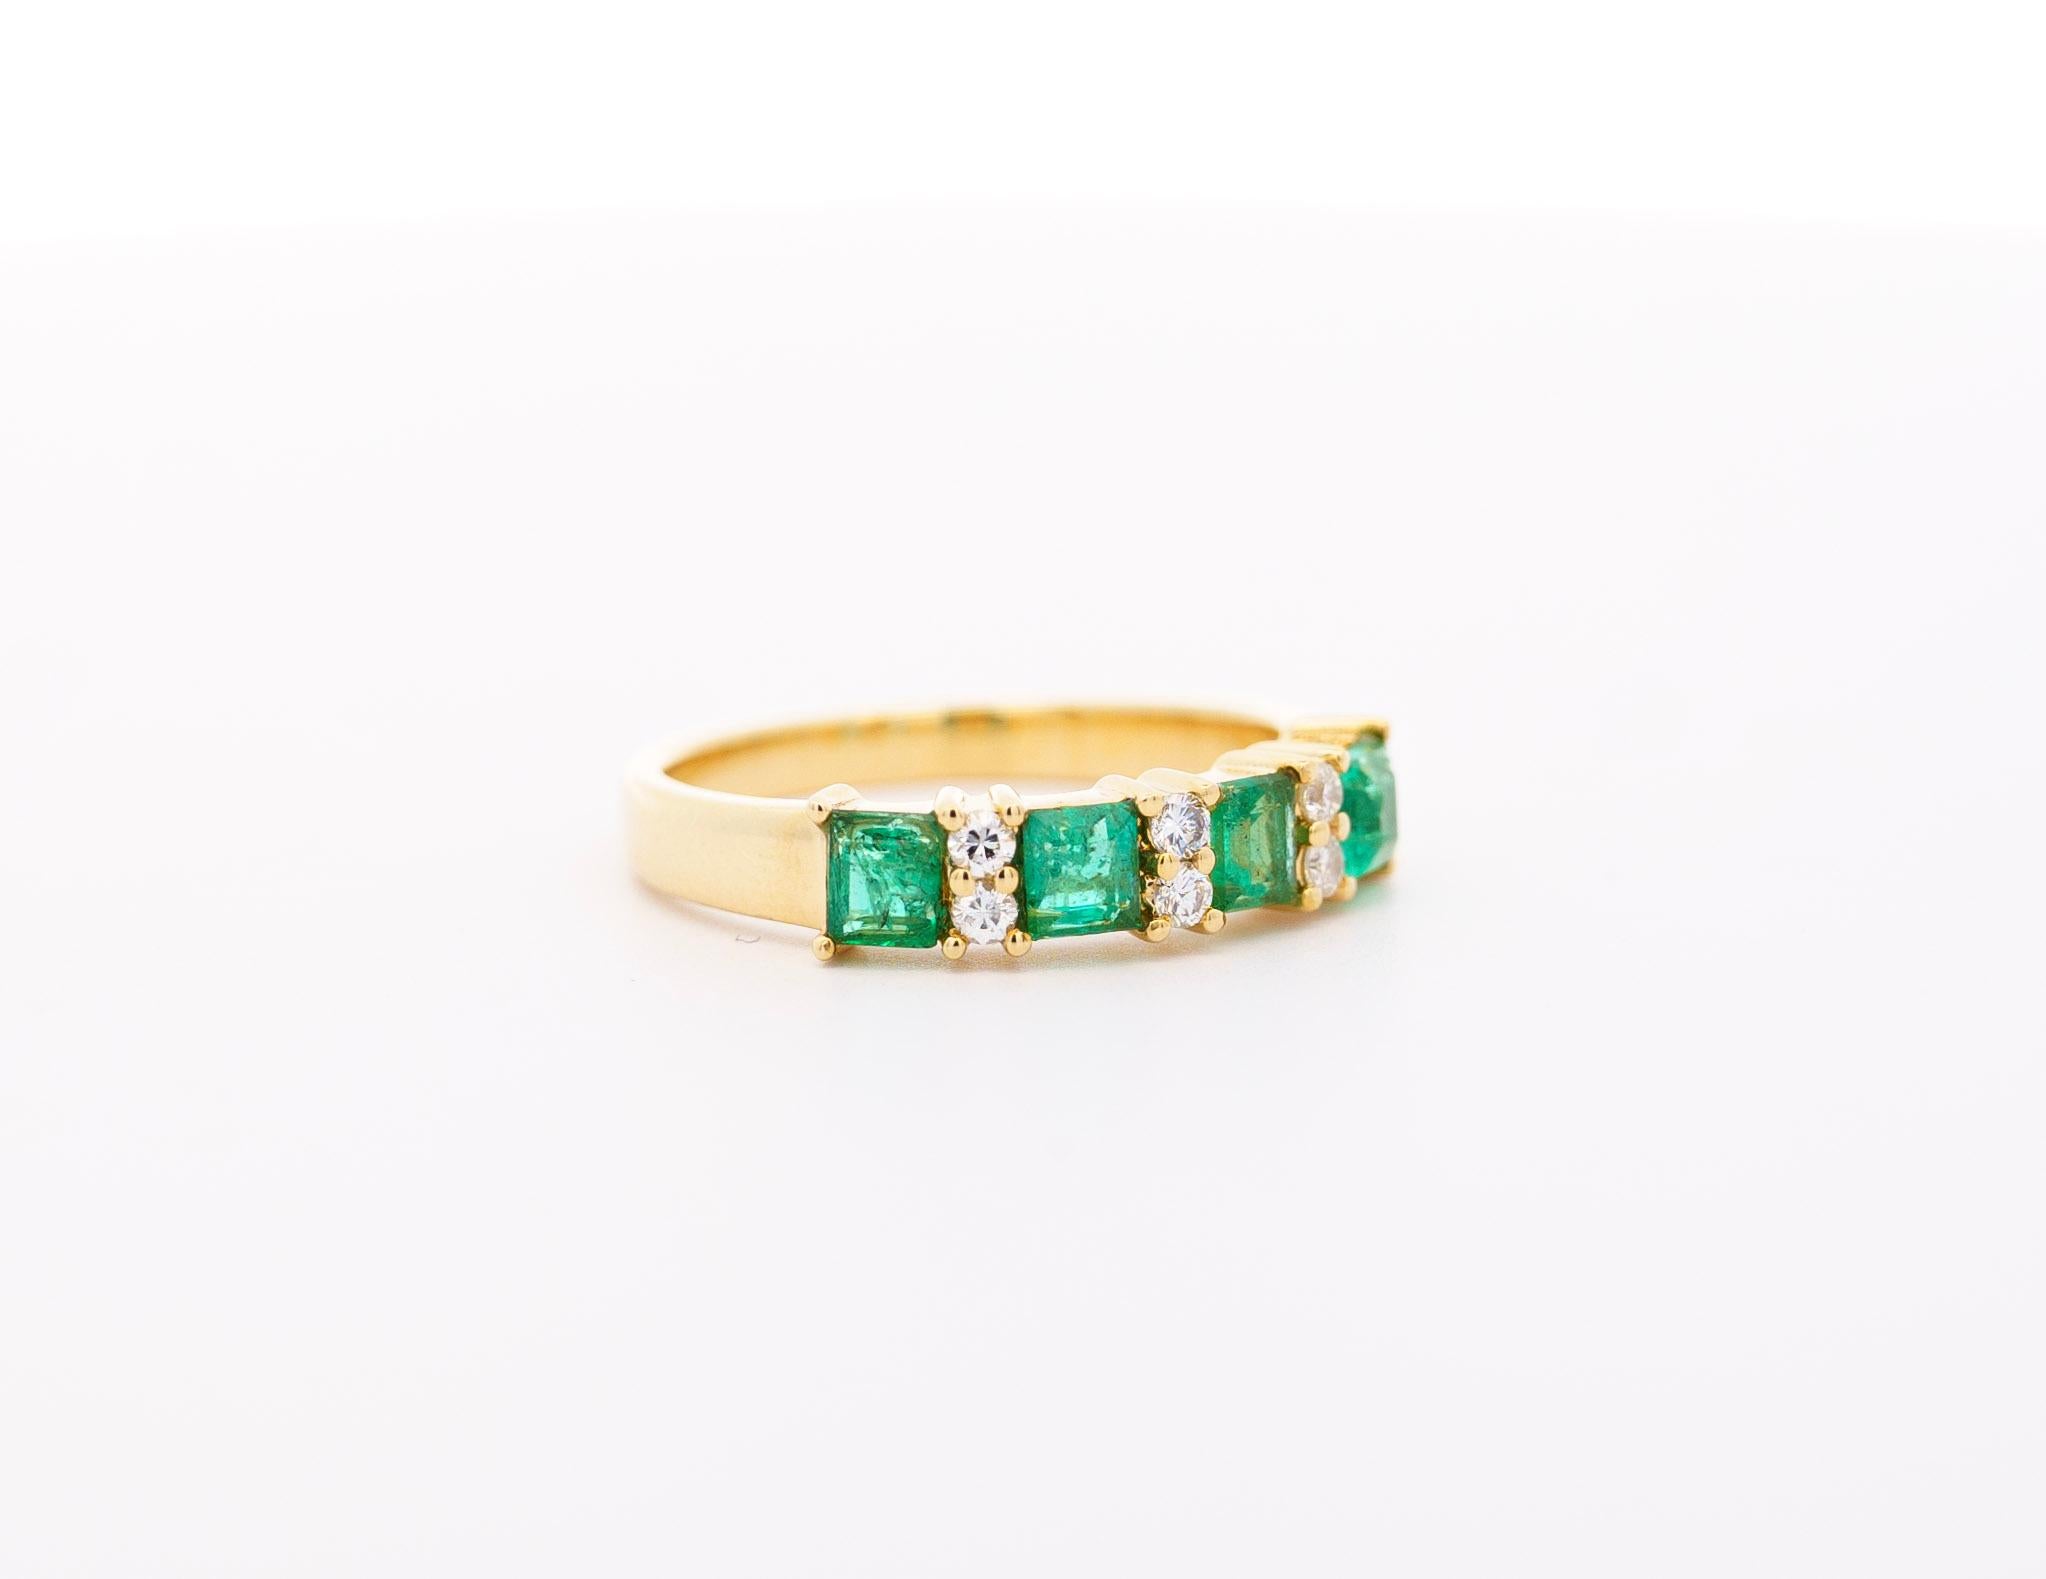 Contemporary 1.0 Carat Square Cut Emerald & Diamond 5-stone Ring in 14K Yellow Gold For Sale